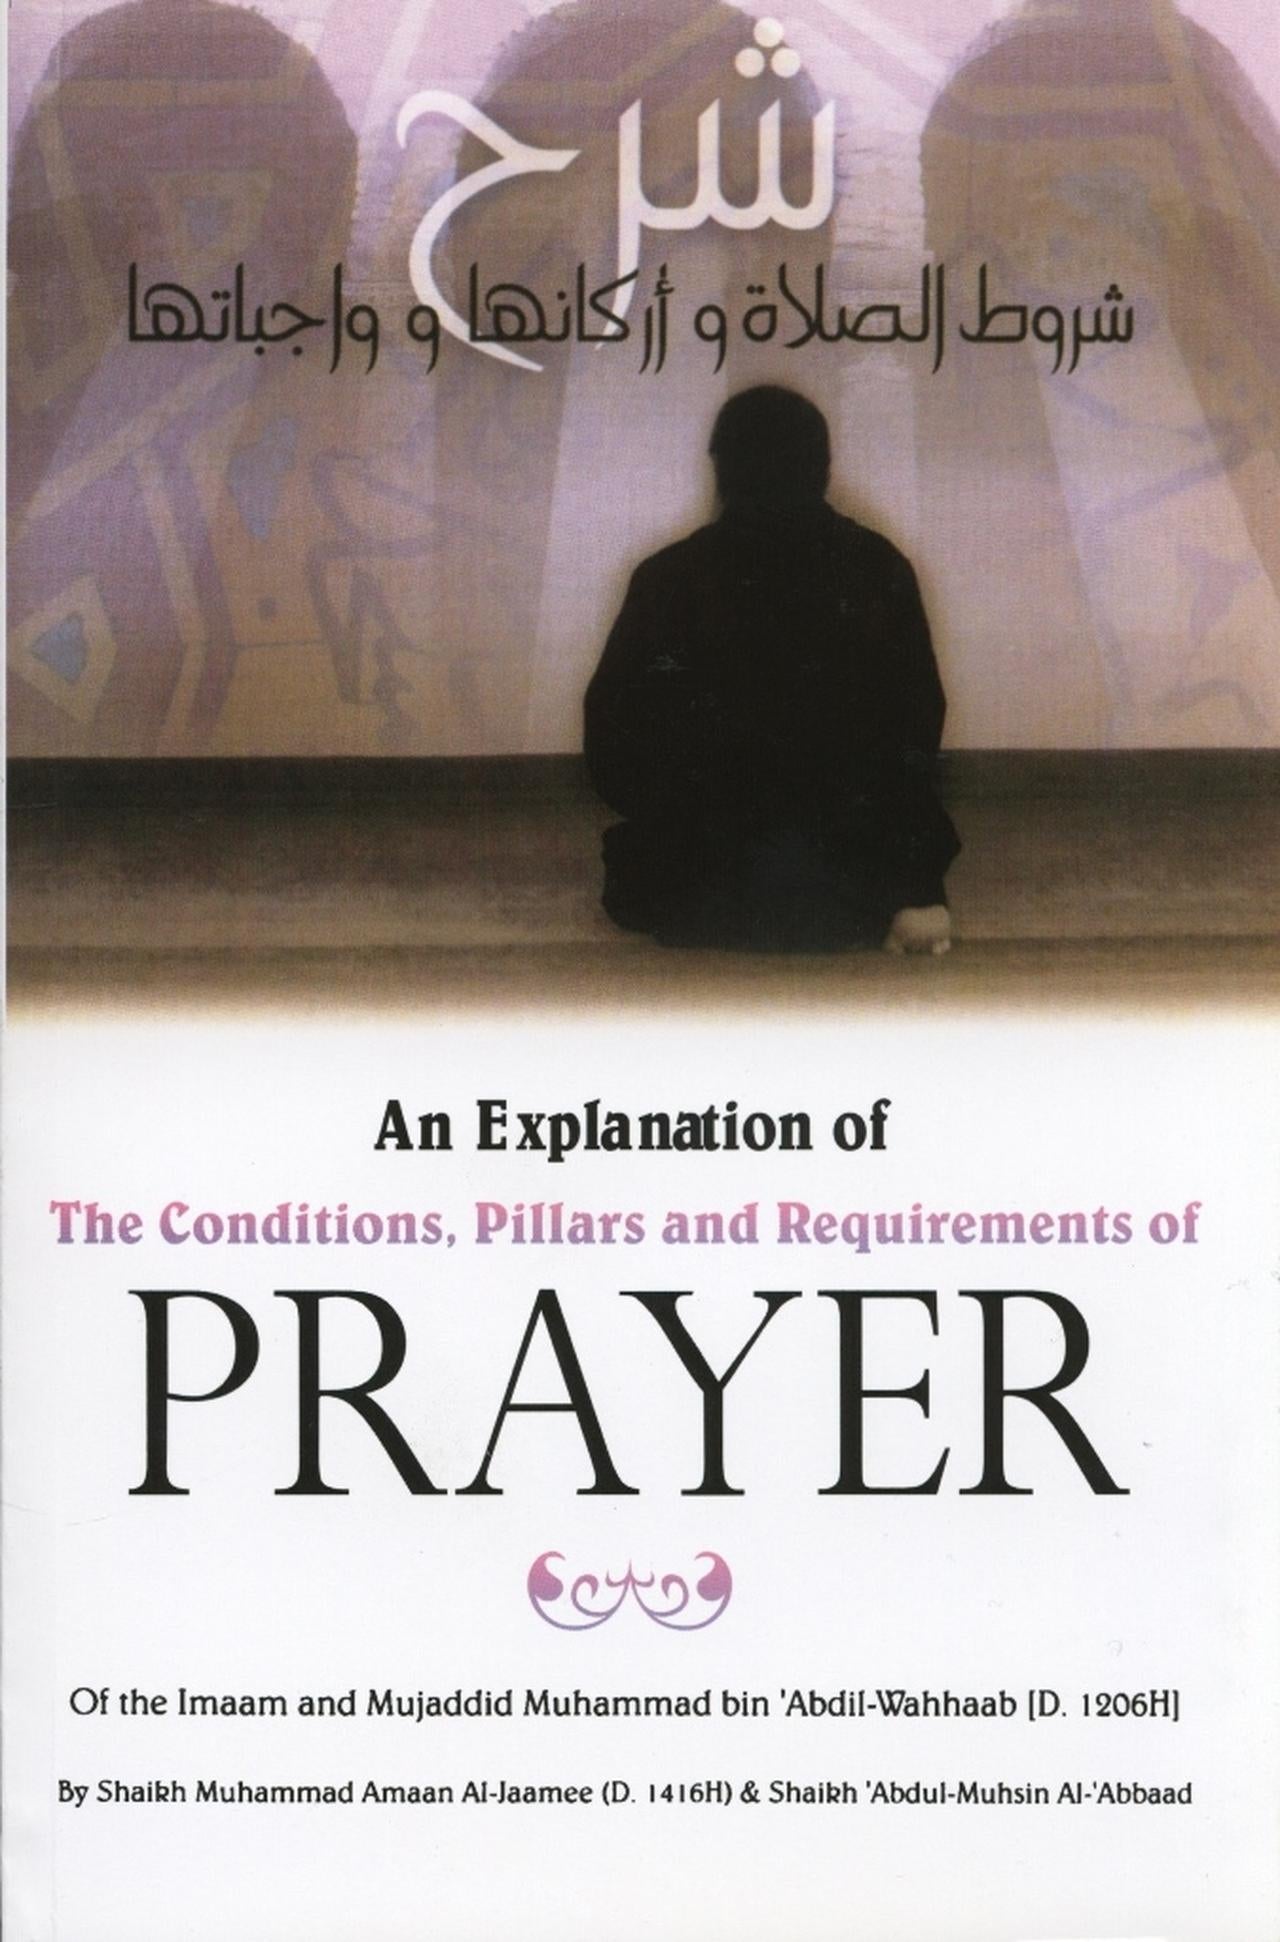 An Explanation Of The Conditions, Pillars And Requirements Of Prayer